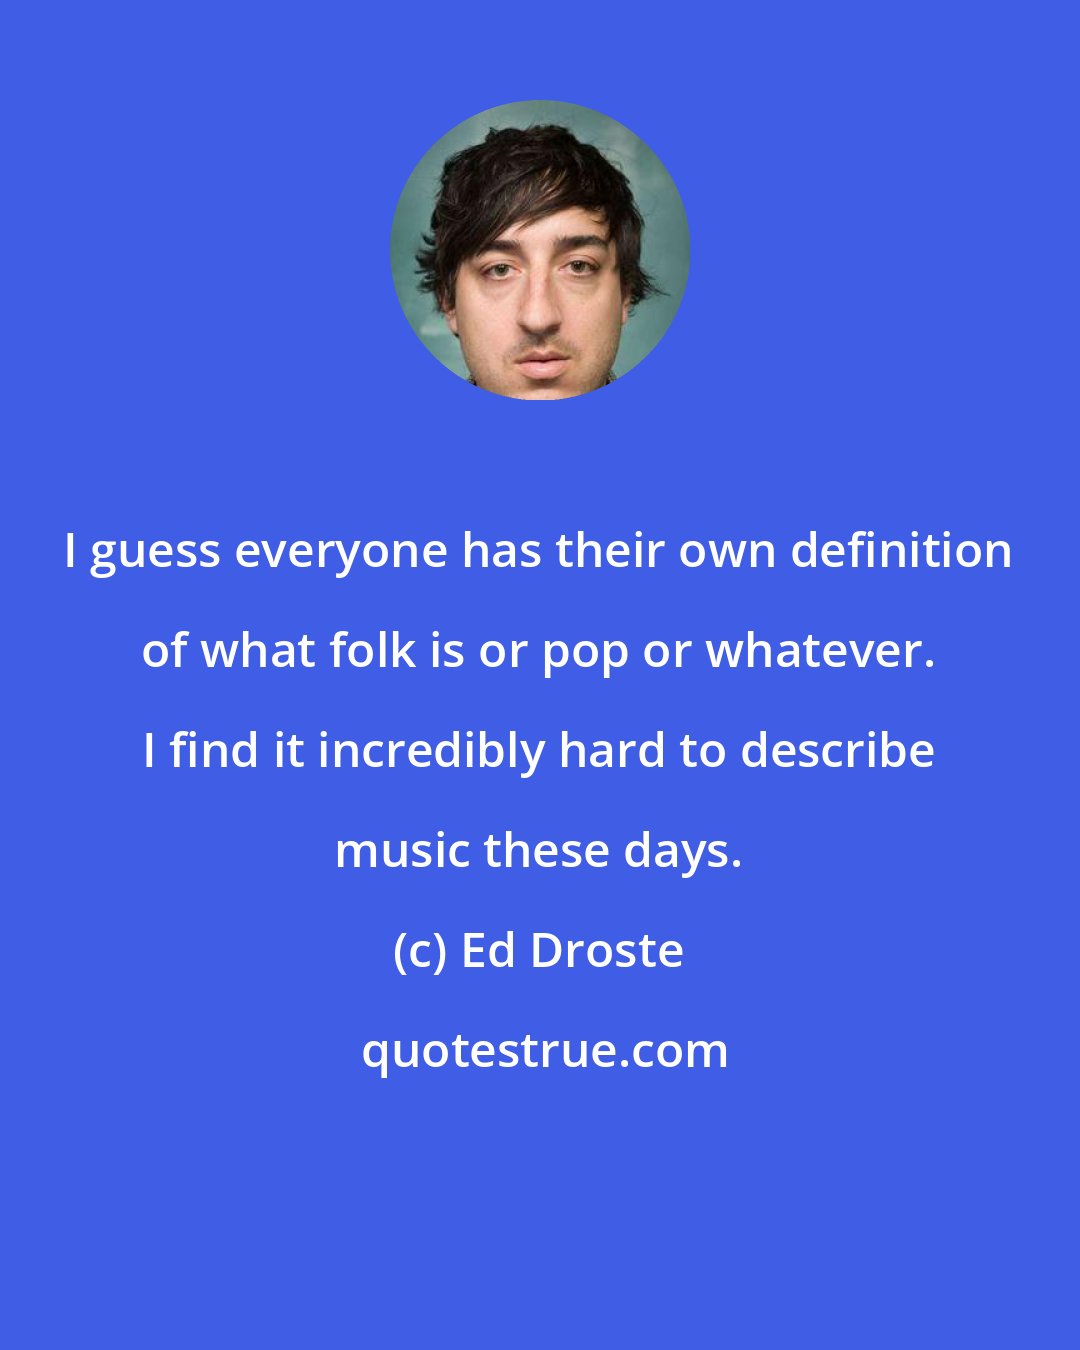 Ed Droste: I guess everyone has their own definition of what folk is or pop or whatever. I find it incredibly hard to describe music these days.